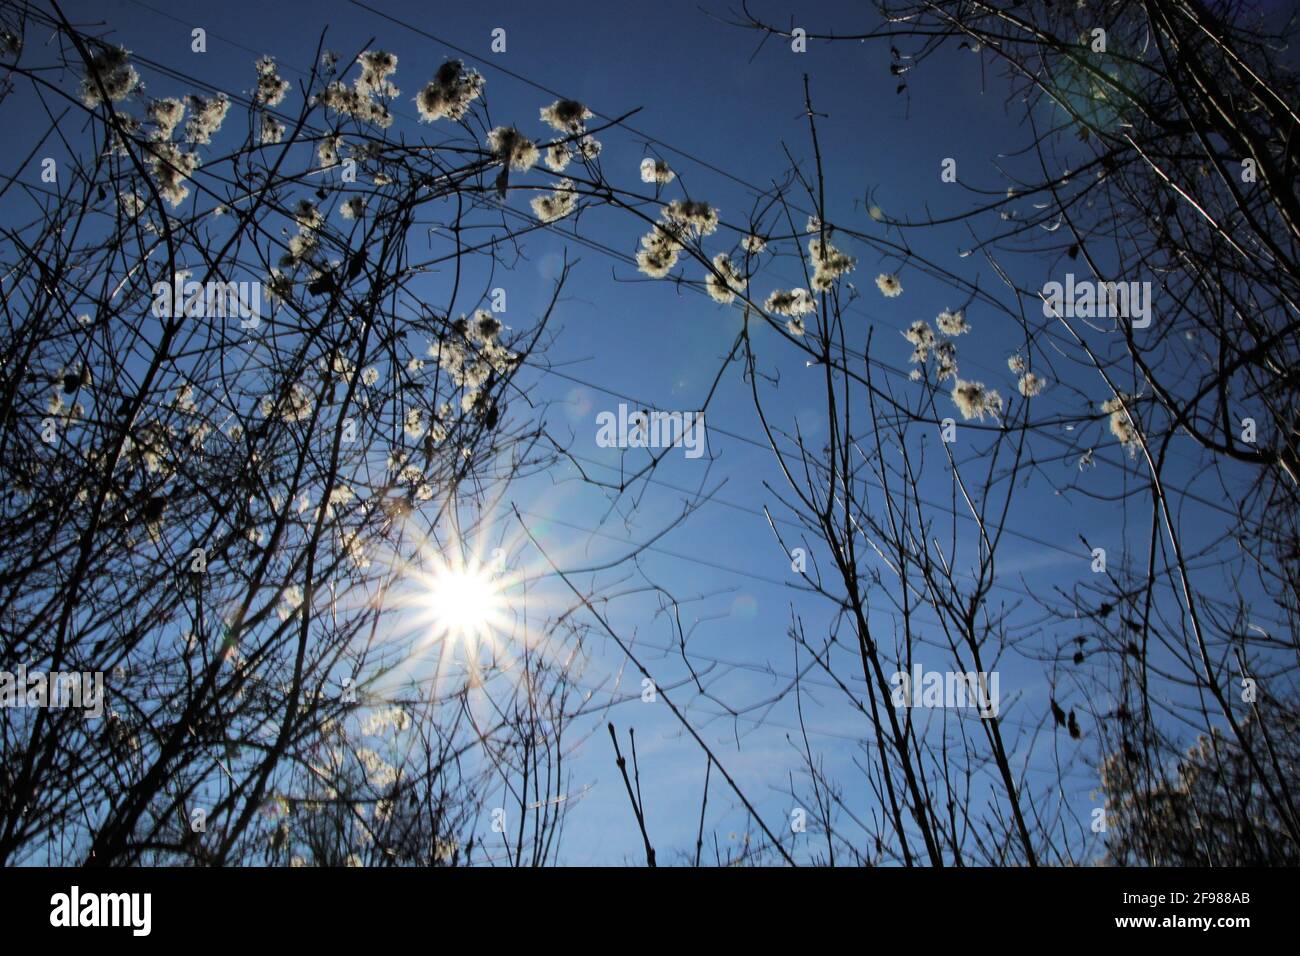 Grasses with fruit bunches in the backlight, sun, blue sky, wool-like Stock Photo